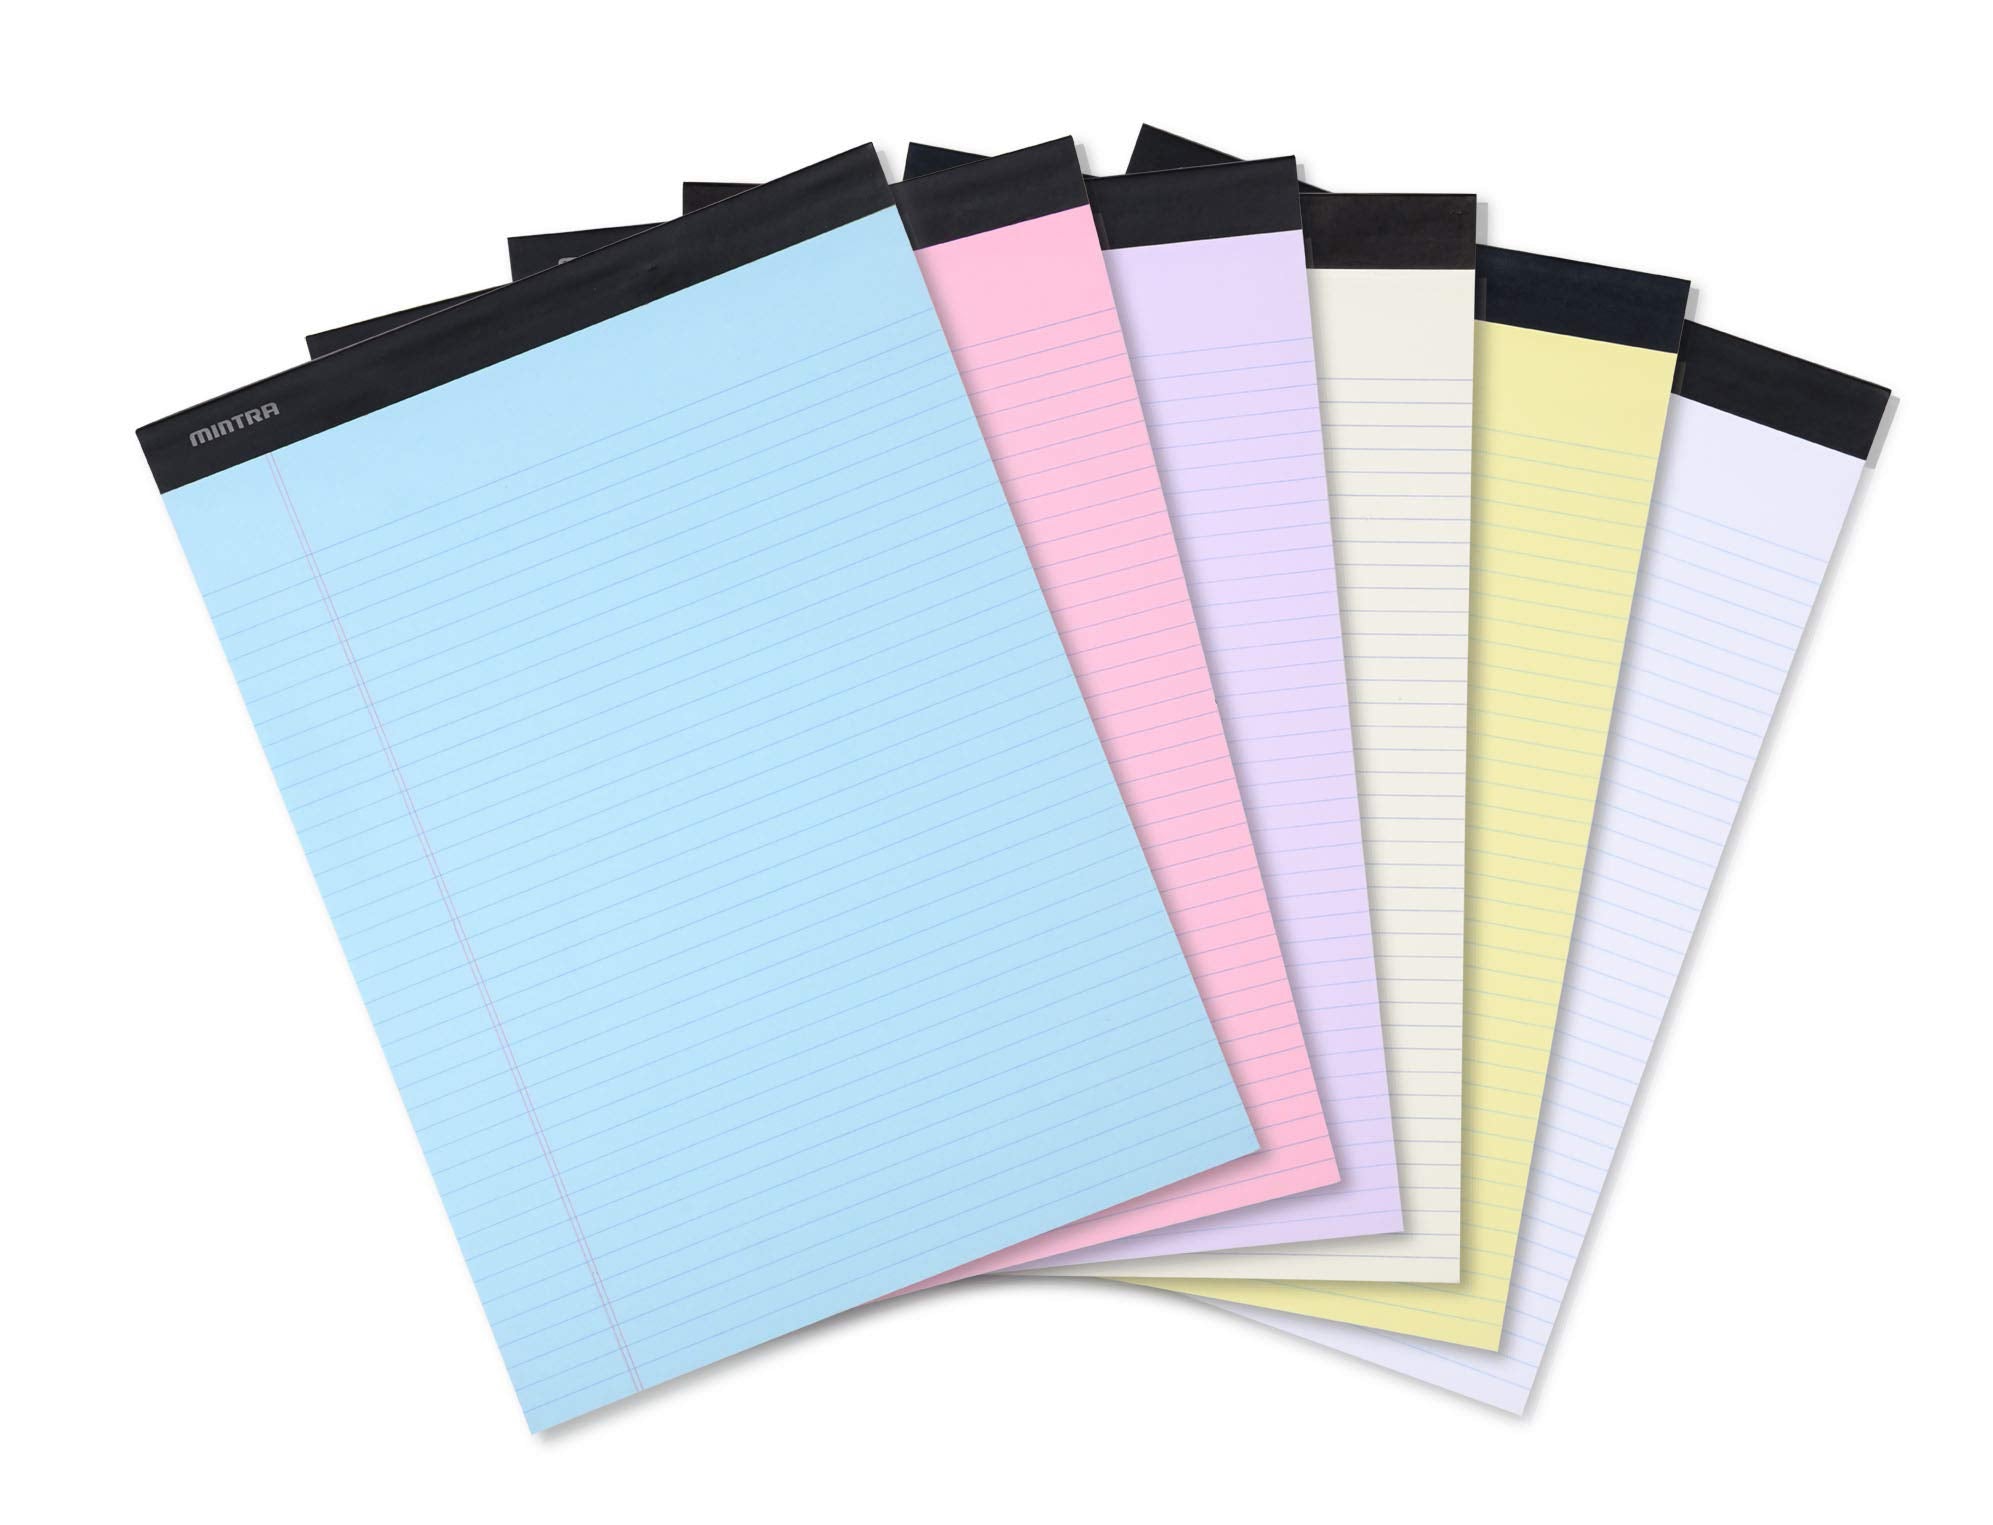 Lakeer A4 Size Designer Paper Pad Multi-Colored, 32 Sheets (16